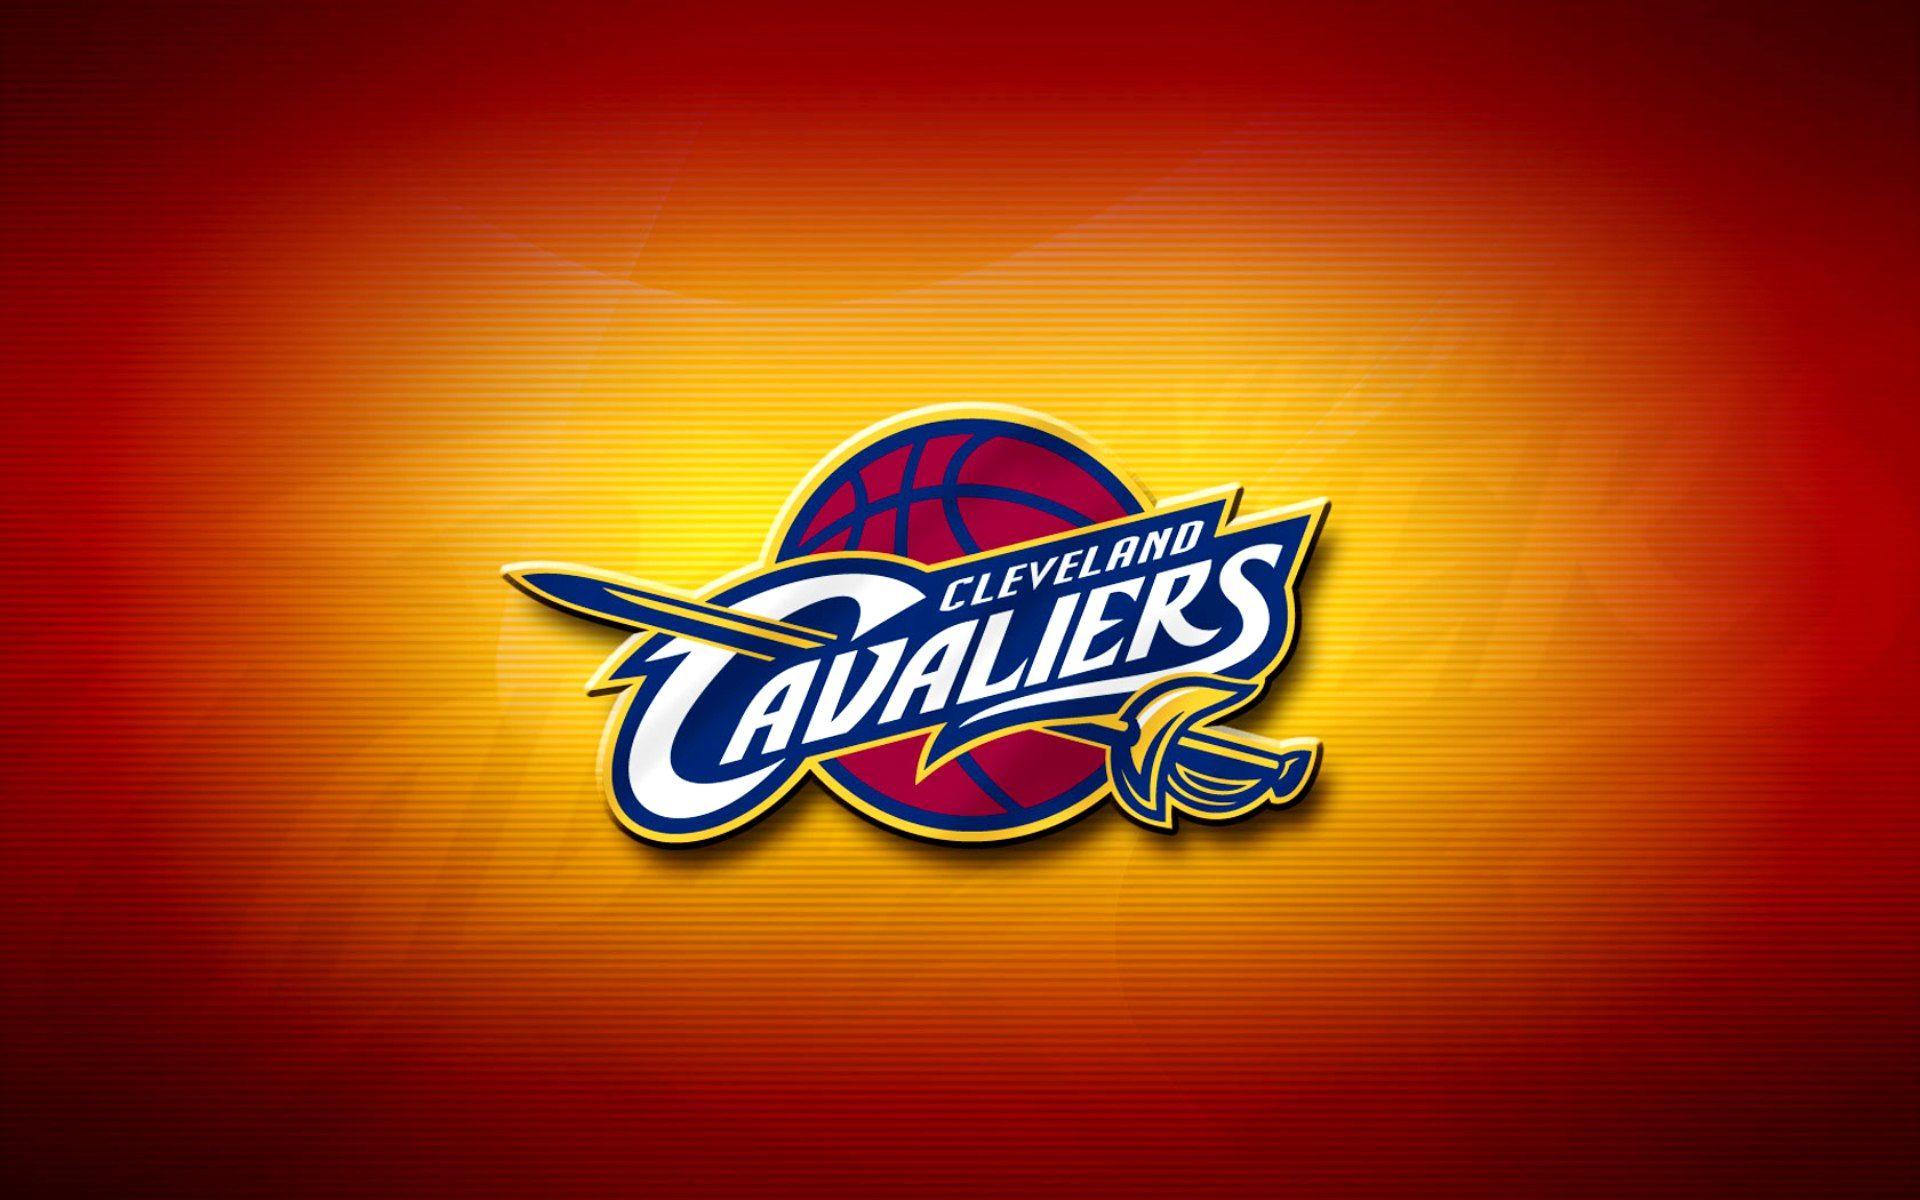 Cleveland Cavaliers Logo Wallpaper Free Download 1920x1200 (244.15 KB)